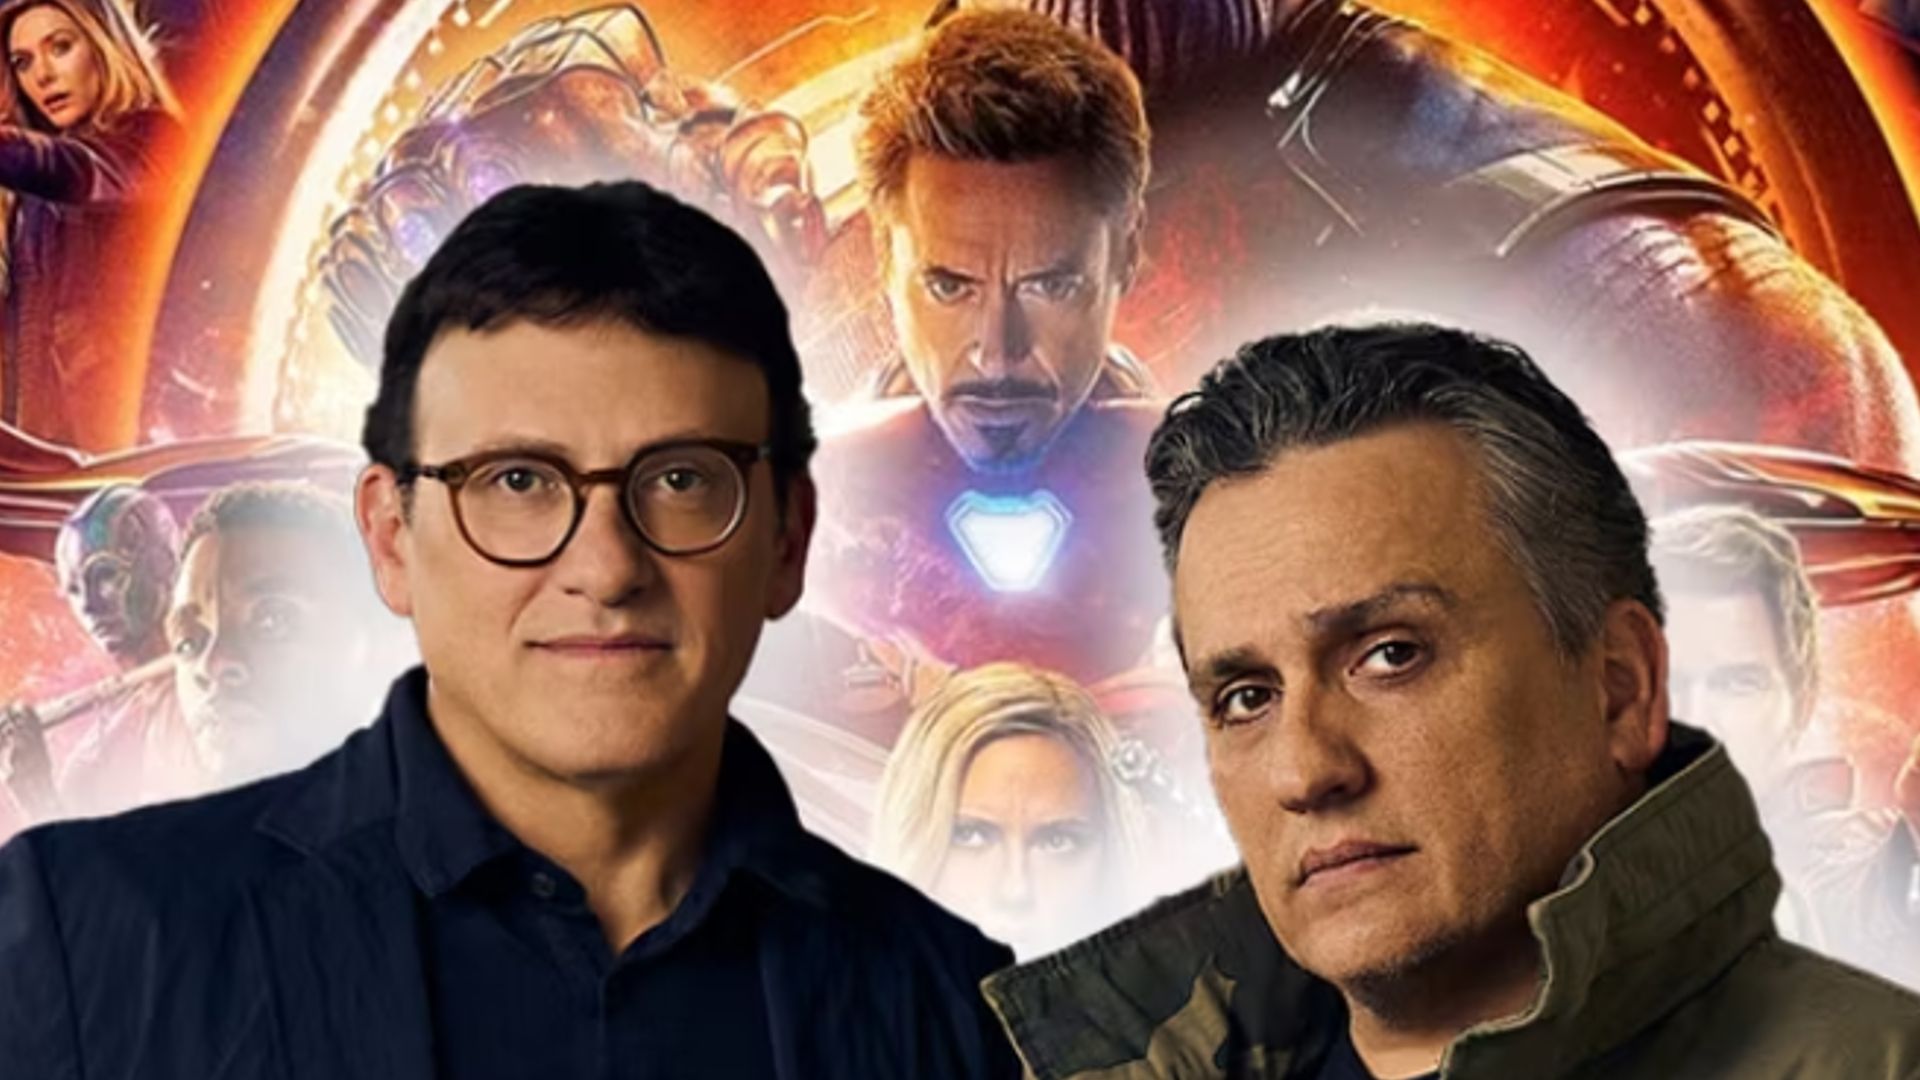 Avengers Russo Brothers Robert Downey Jr.